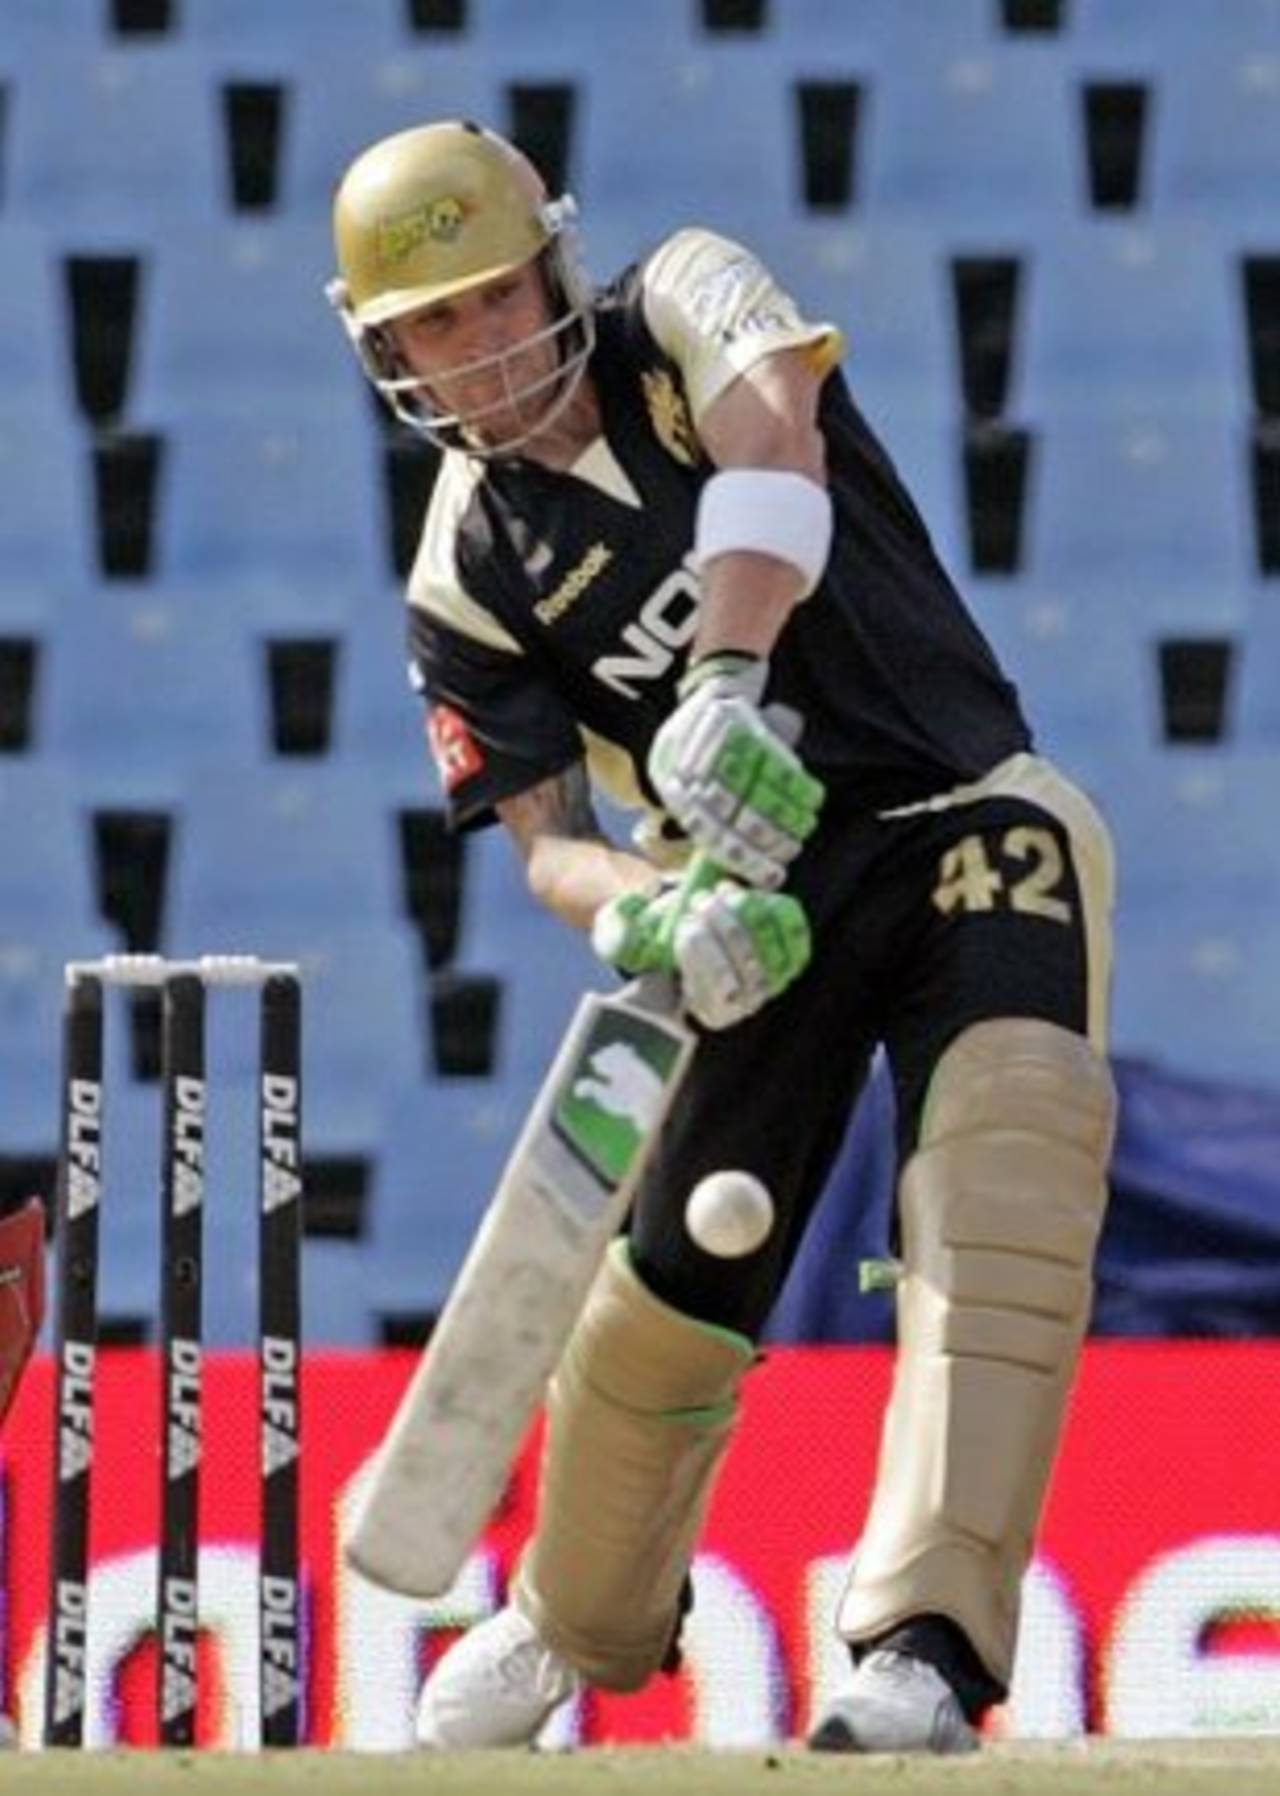 Brendon McCullum did not qualify for the Champions League through the Kolkata Knight Riders but he can play for either Otago or New South Wales&nbsp;&nbsp;&bull;&nbsp;&nbsp;Associated Press